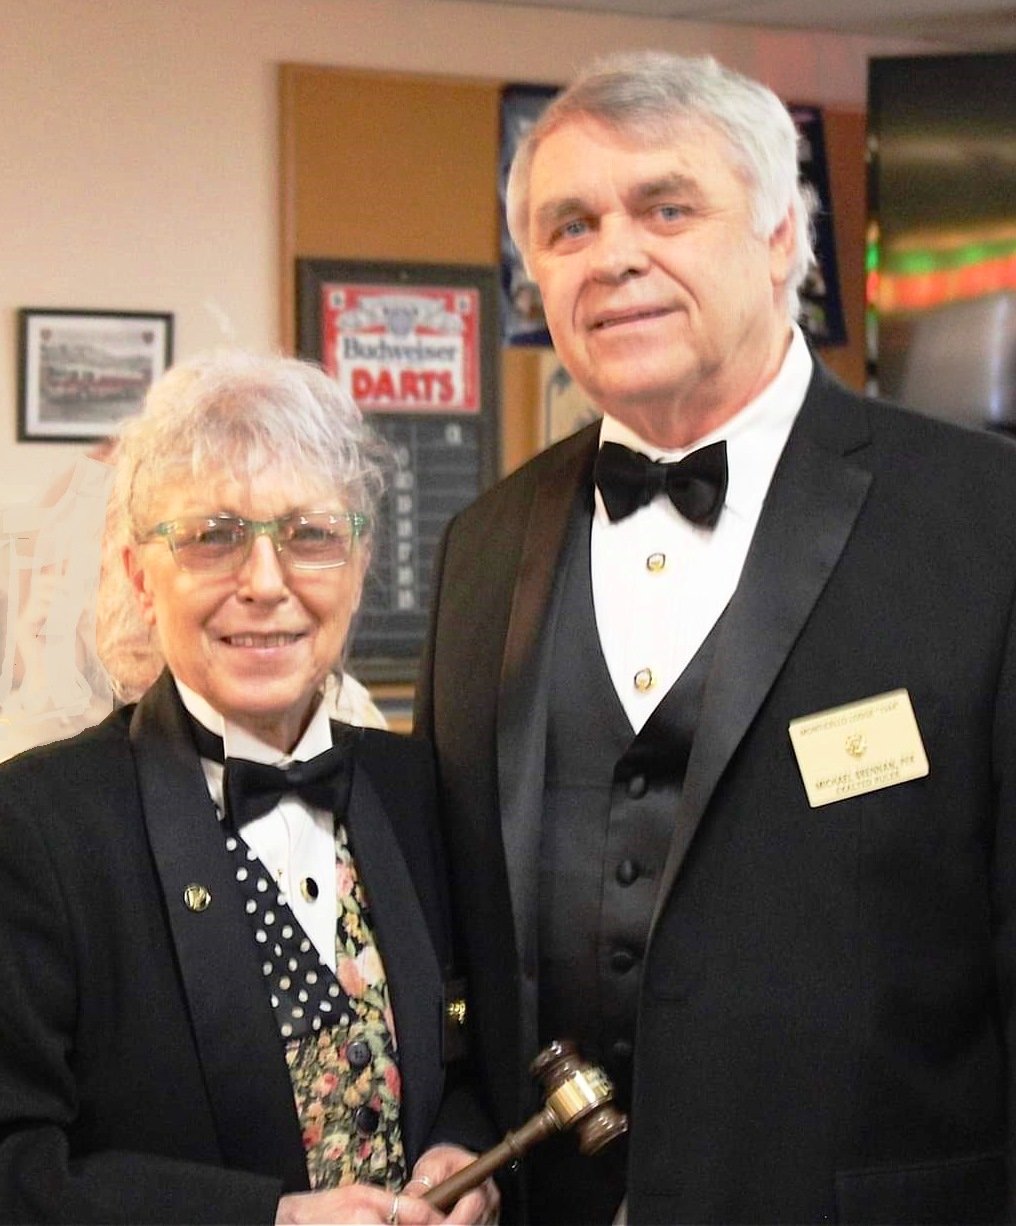 New Monticello Elks exalted ruler Ronni Yakin-Scannell holds the gavel of authority. It was presented to her by past exalted ruler Mike Brennan at a ceremony on April 3. ..